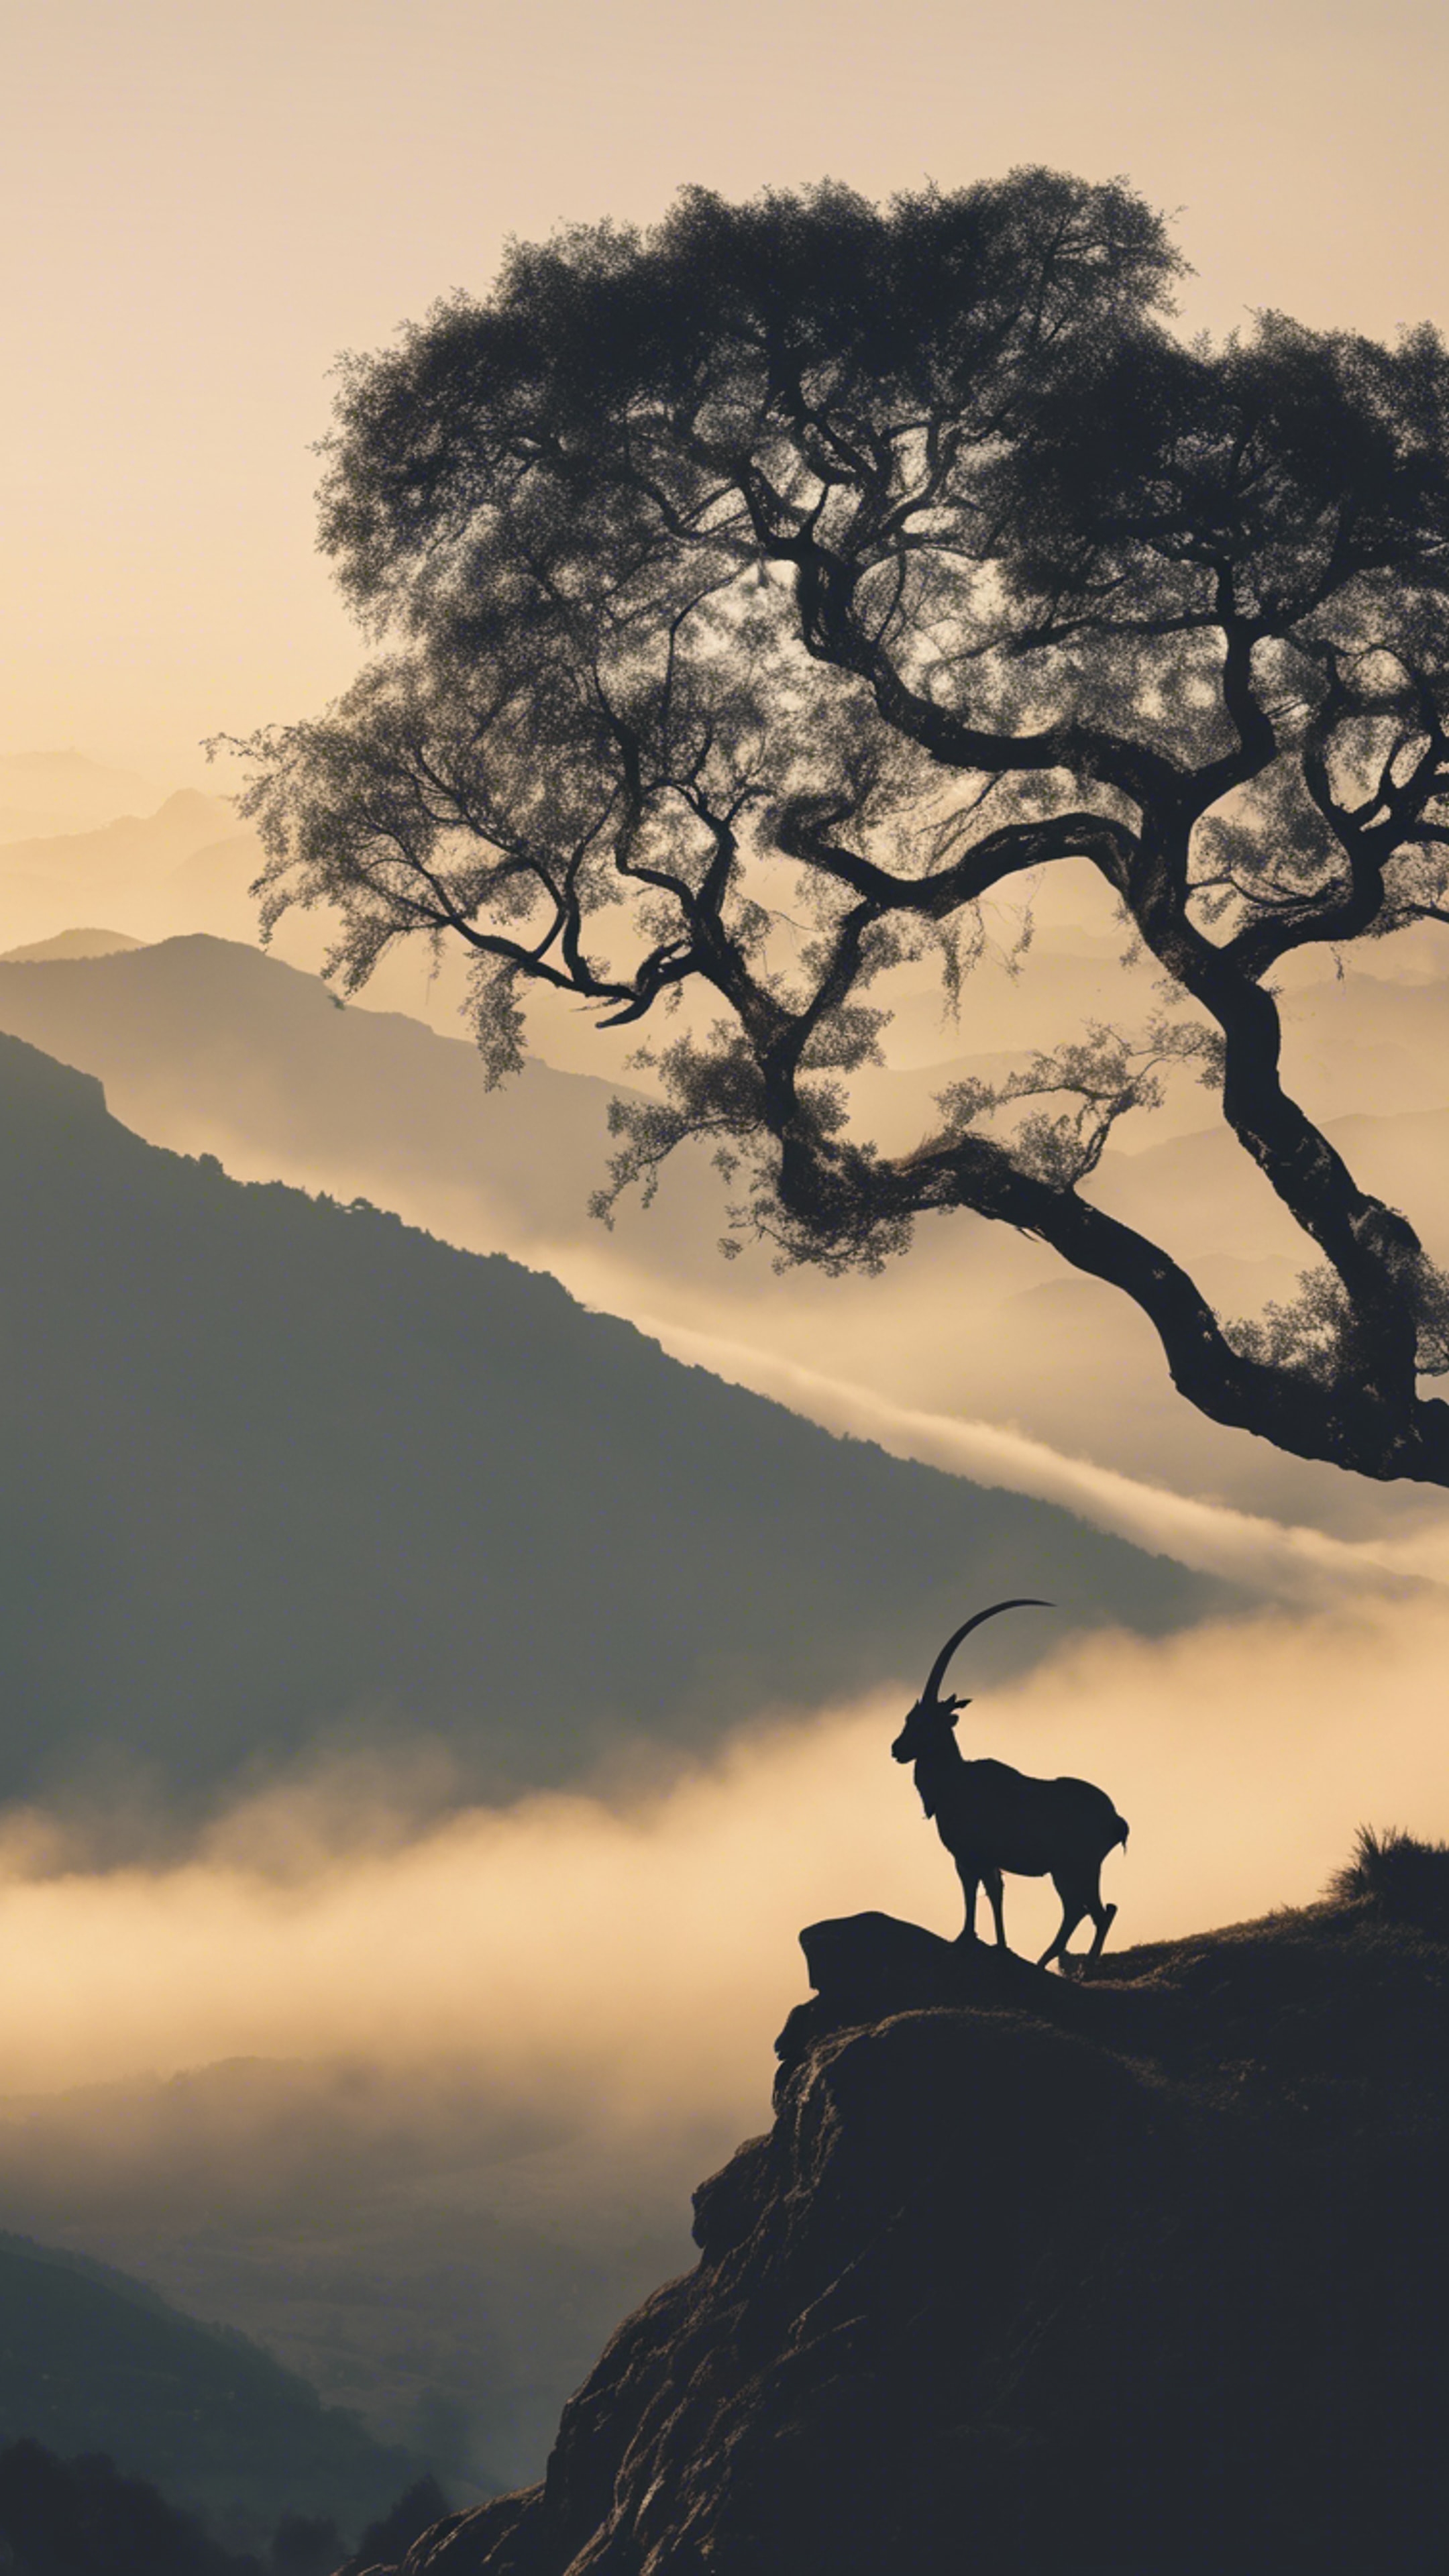 A Capricorn silhouette etched in a misty mountain cliff, haloed by the crisp dawn light.壁紙[7d90055e9f8d44cb986a]